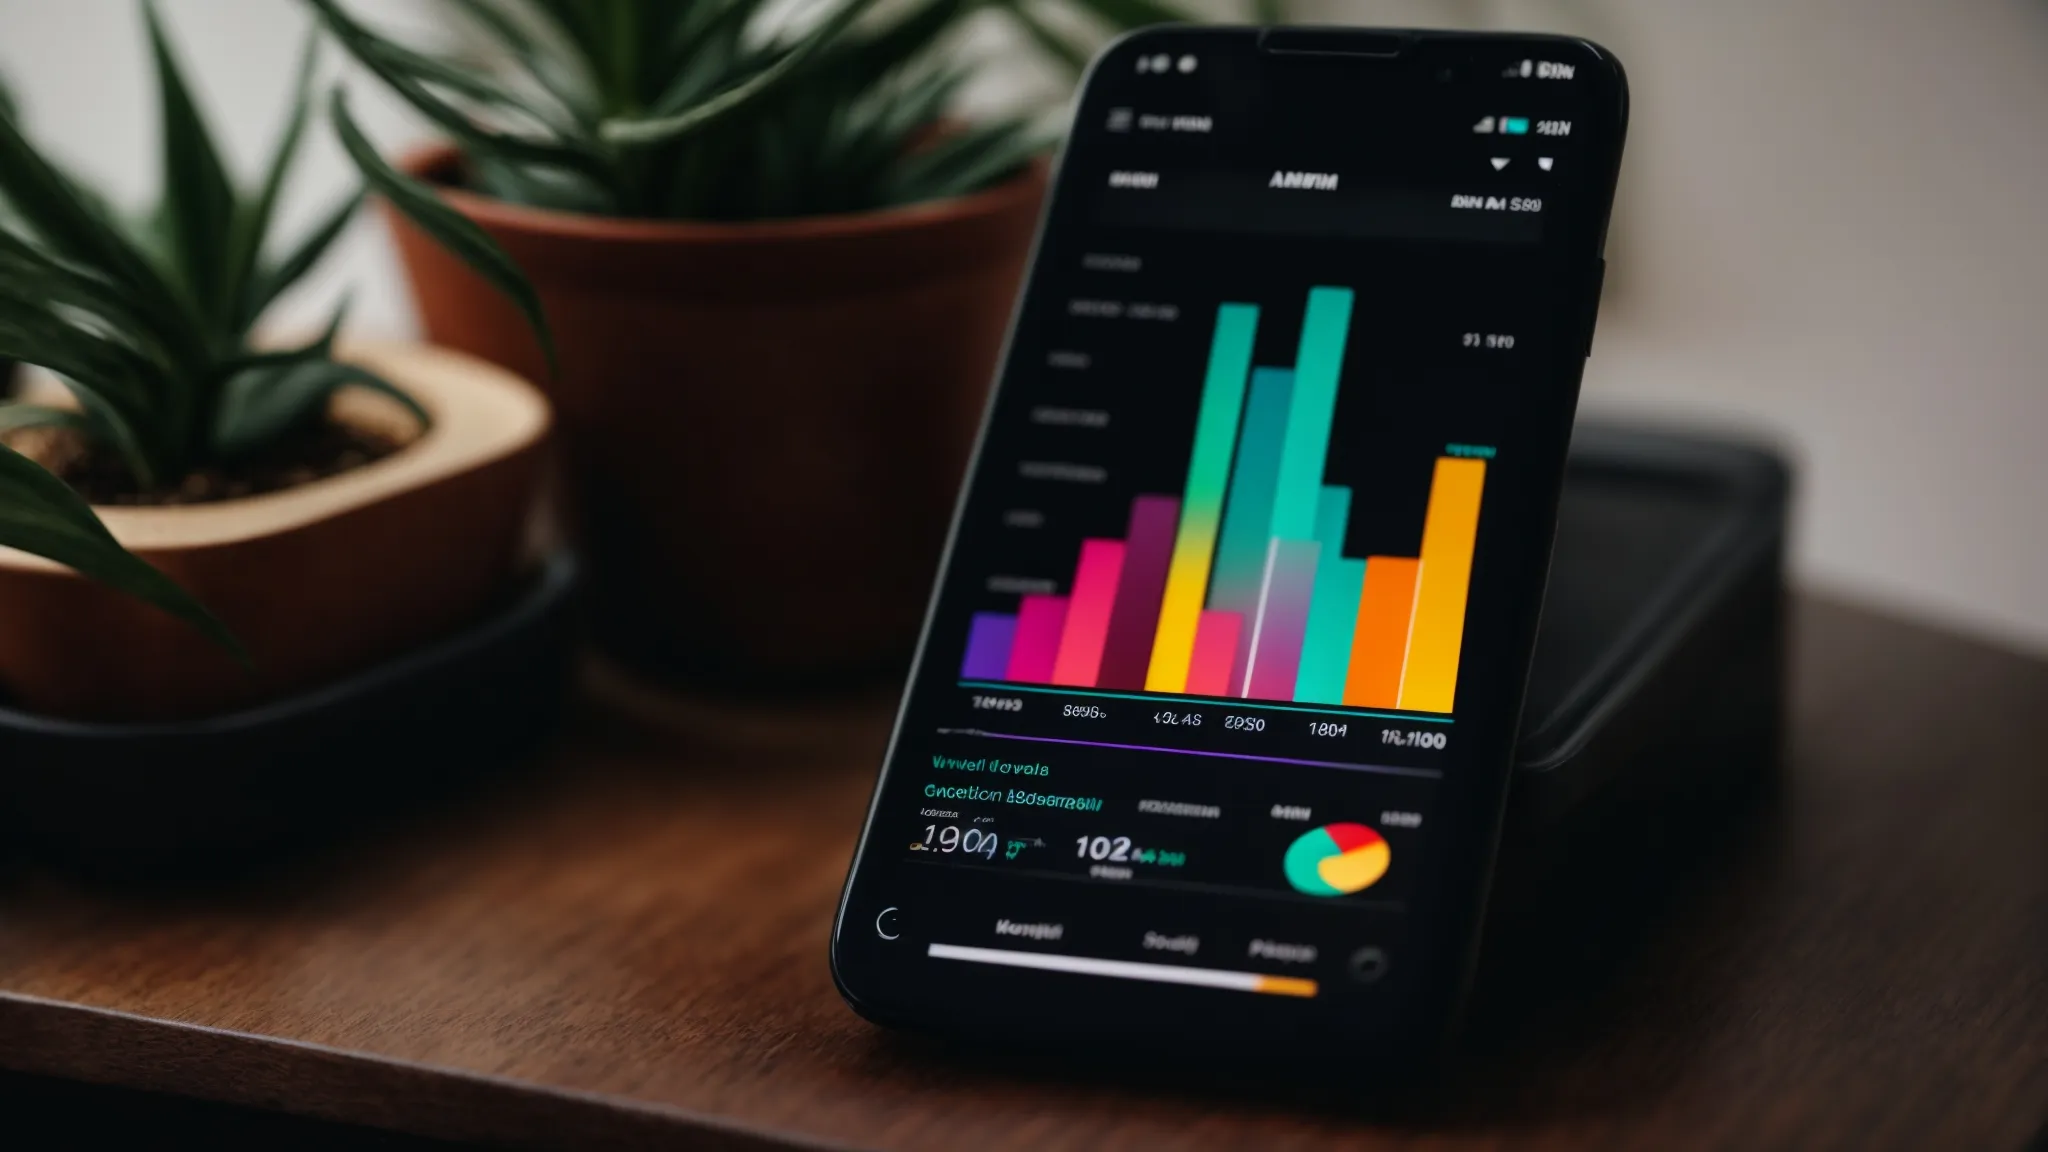 a smartphone displaying colorful graphs and analytics on its screen, resting on a desk beside a potted plant.